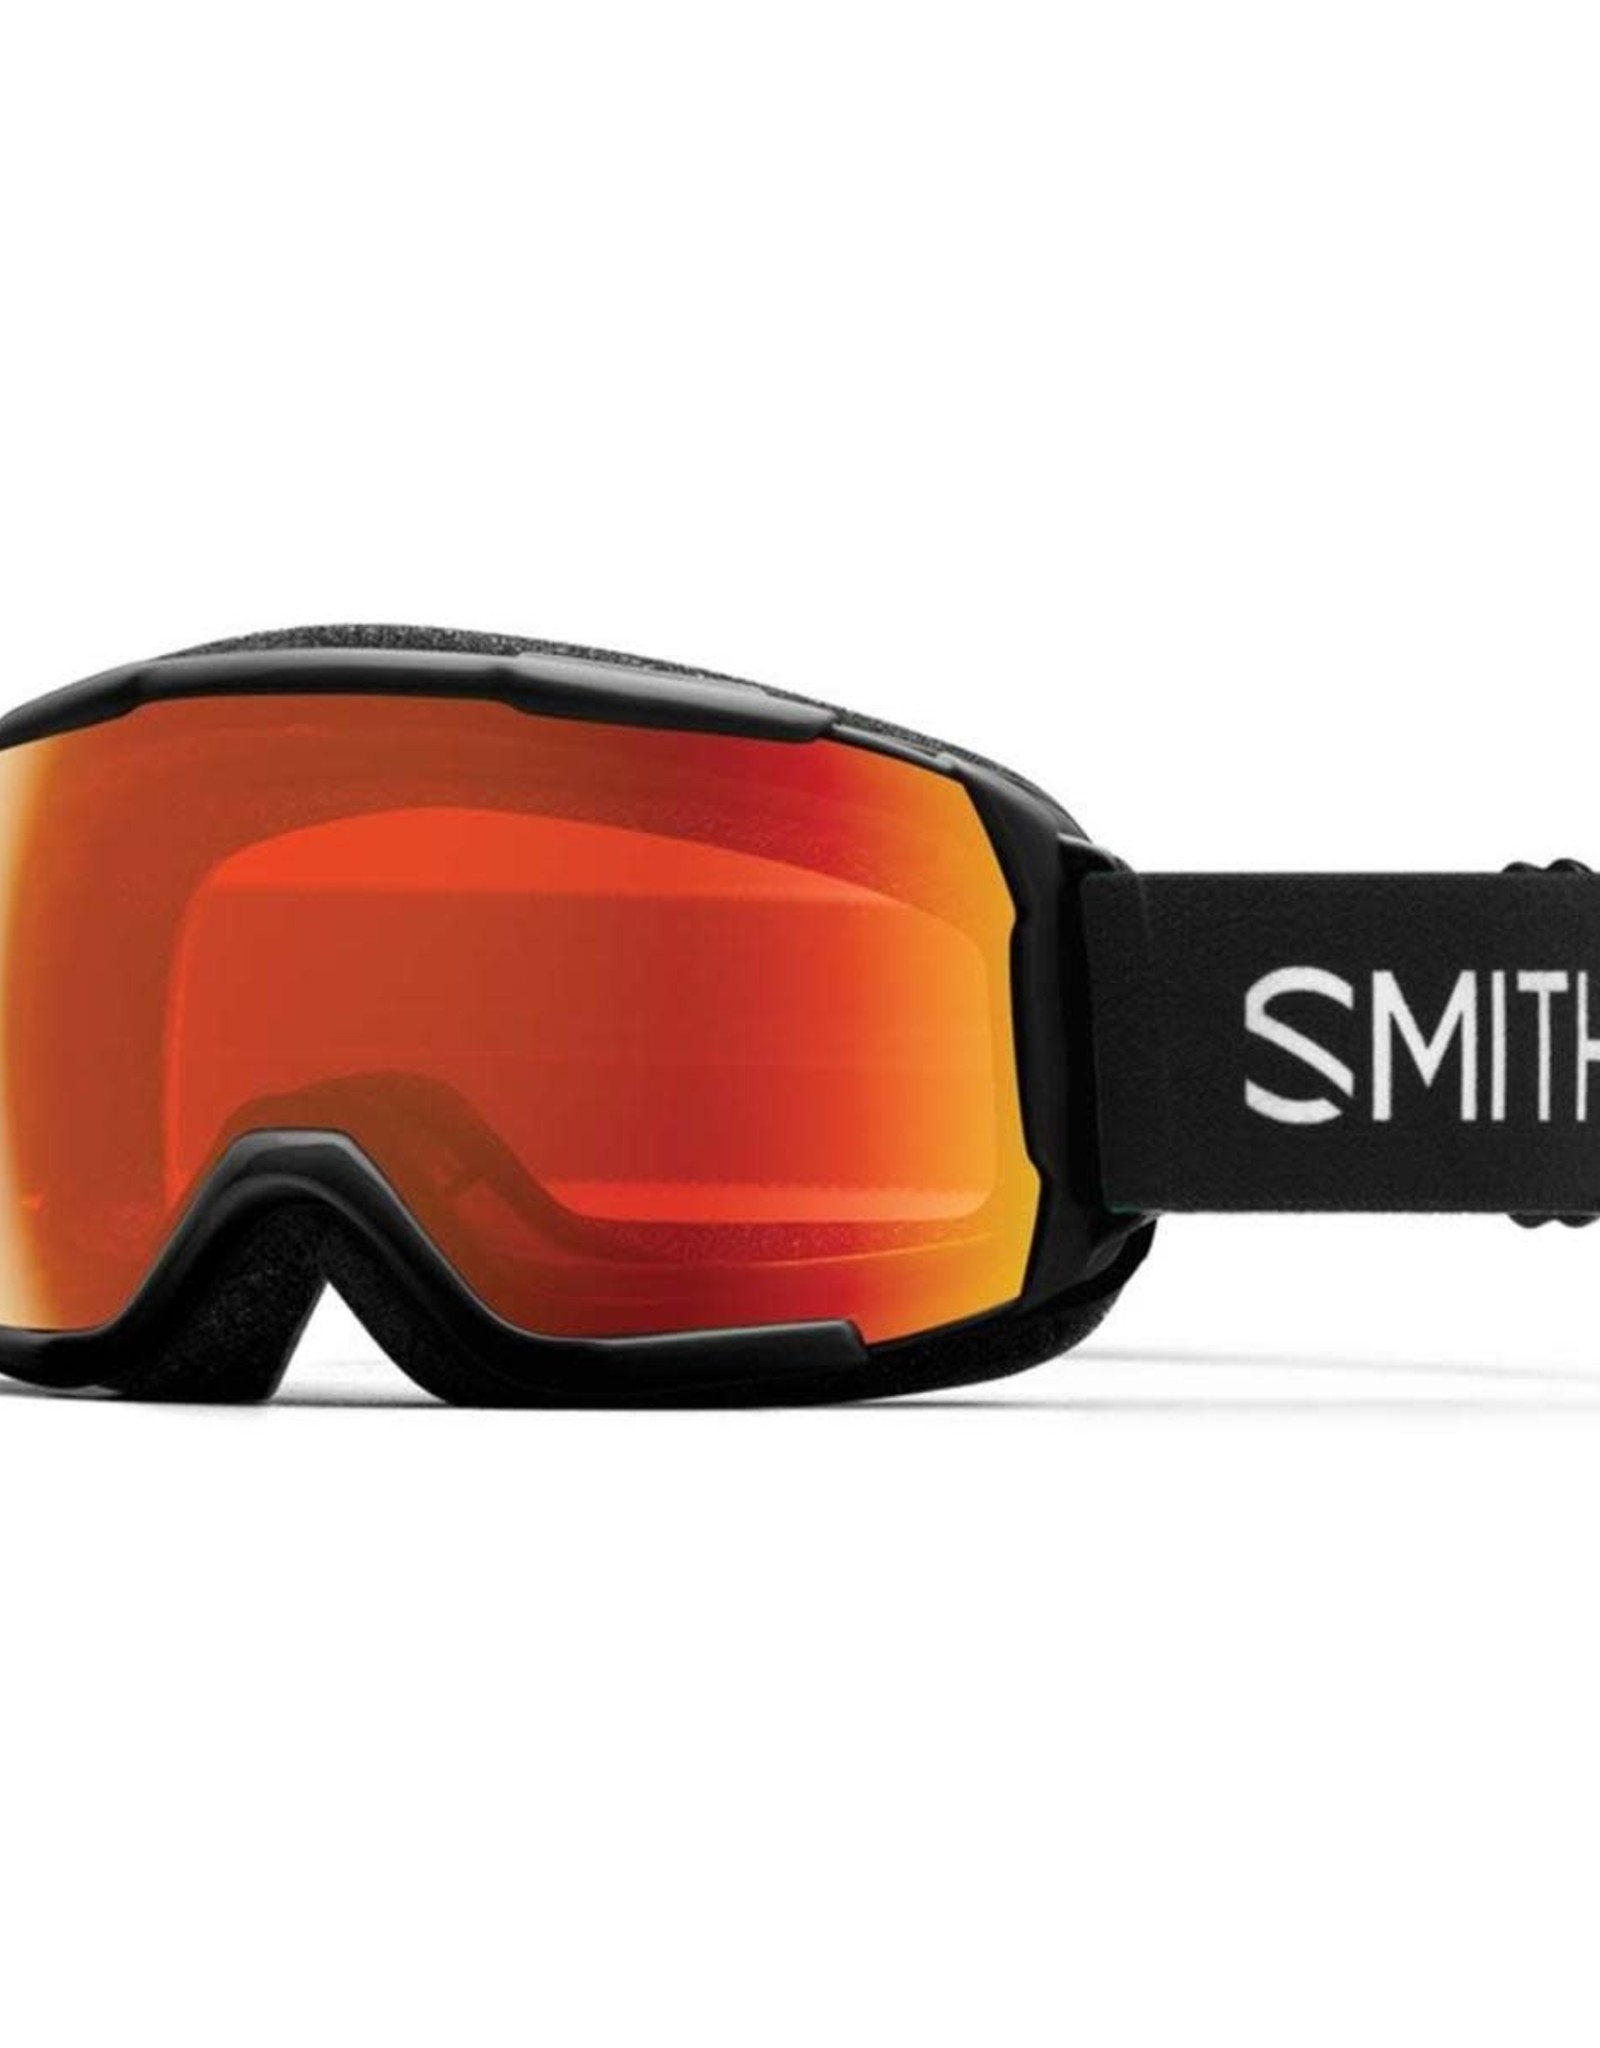 SMITH Smith GROM Jr Black with Red Sol-X Mirror Lens